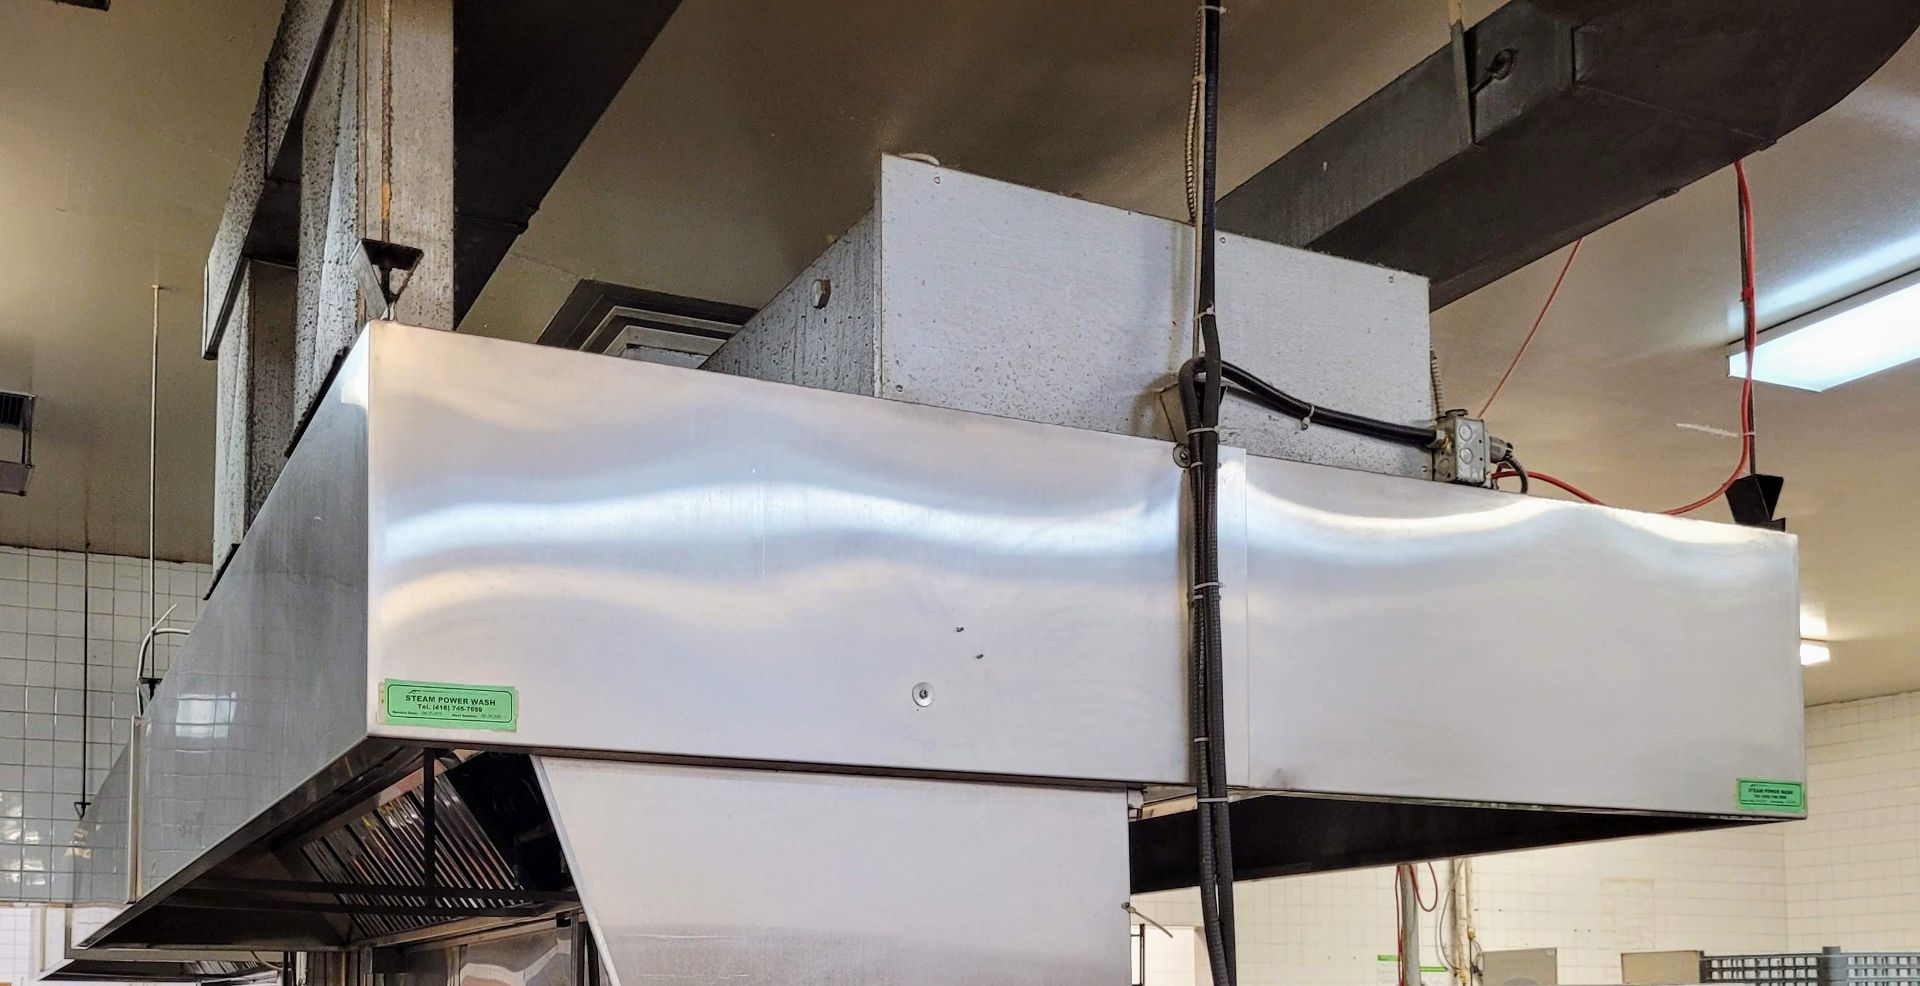 STAINLESS STEEL EXHAUST HOOD W/ FIRE SUPPRESSION, APPROX 20'L X 10'W - Image 2 of 6